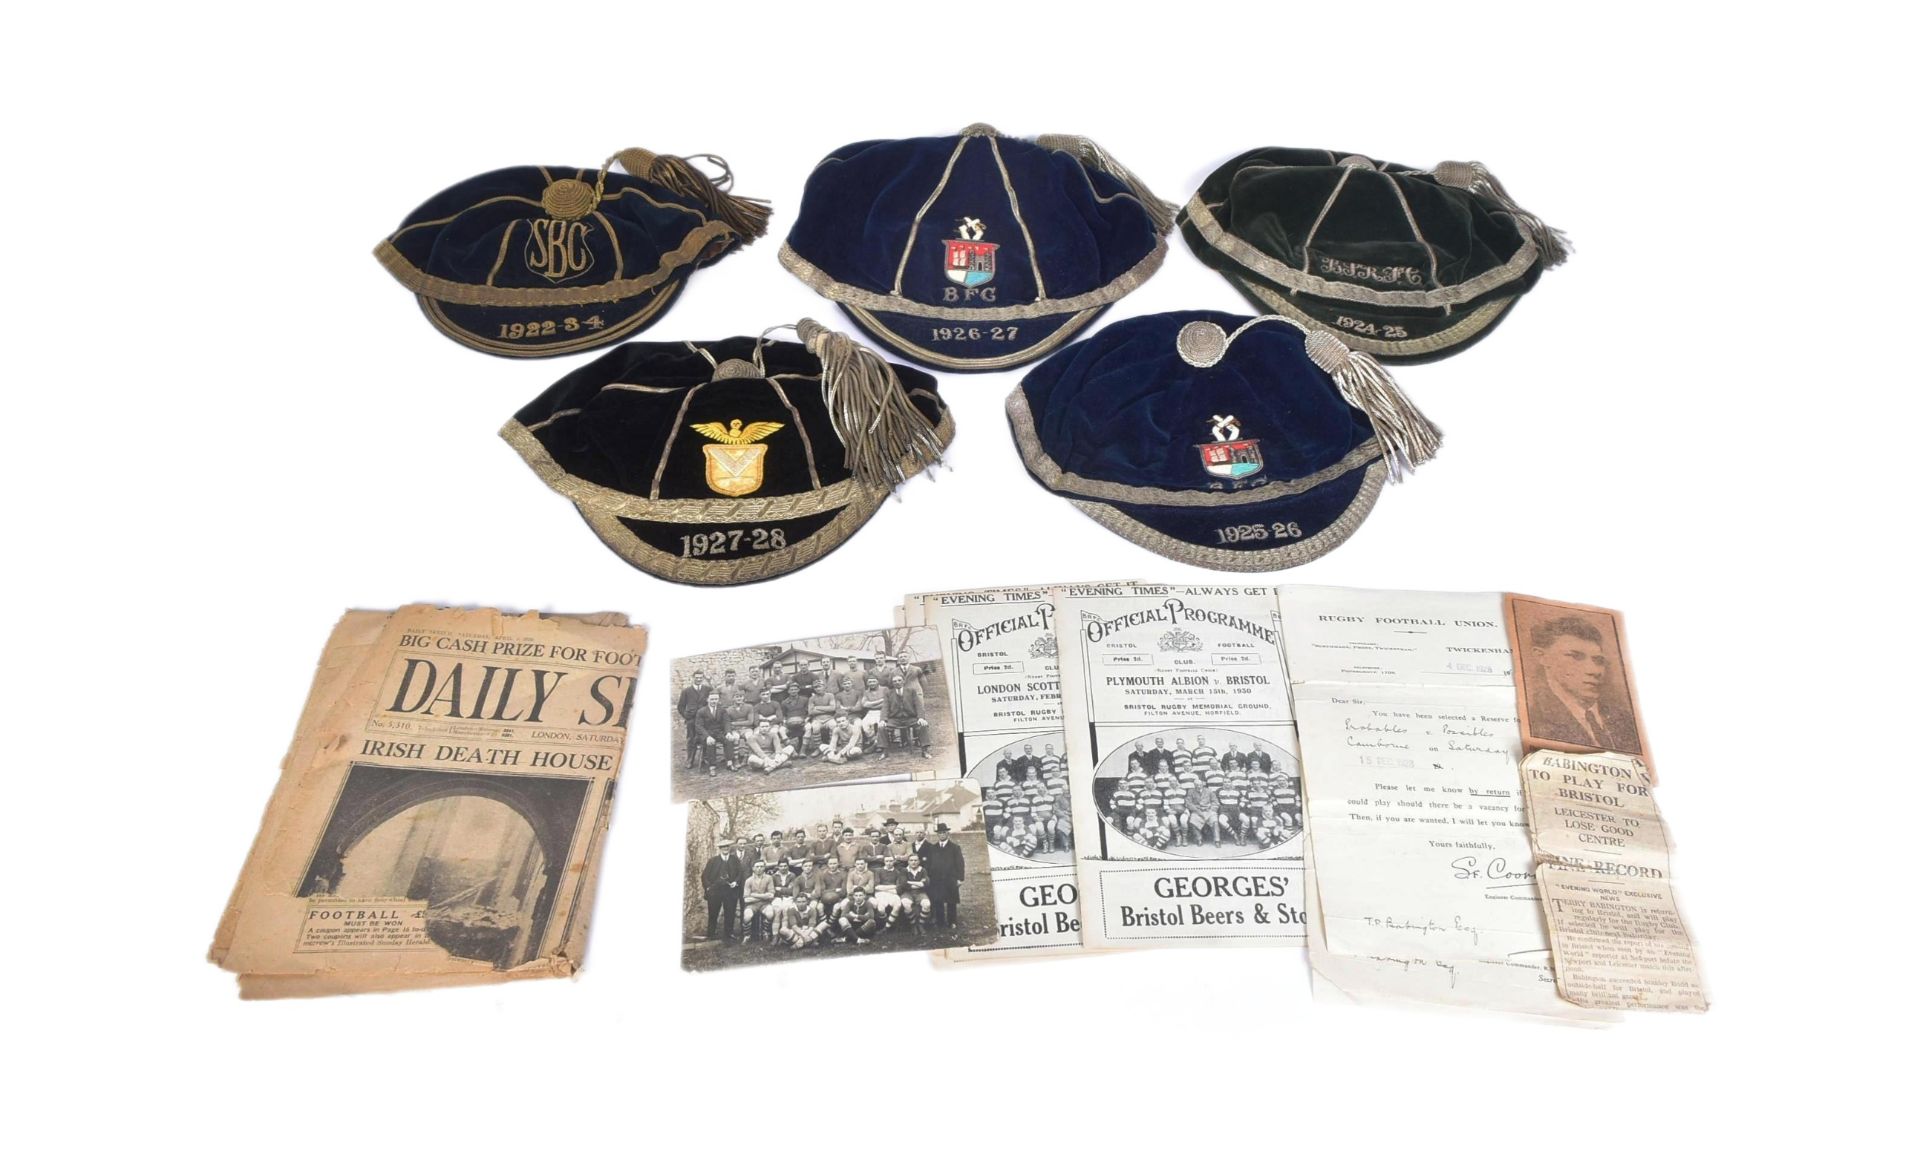 RUGBY - ORIGINAL 1920S RUGBY FOOTBALL CAPS FOR TERRY BABINGTON